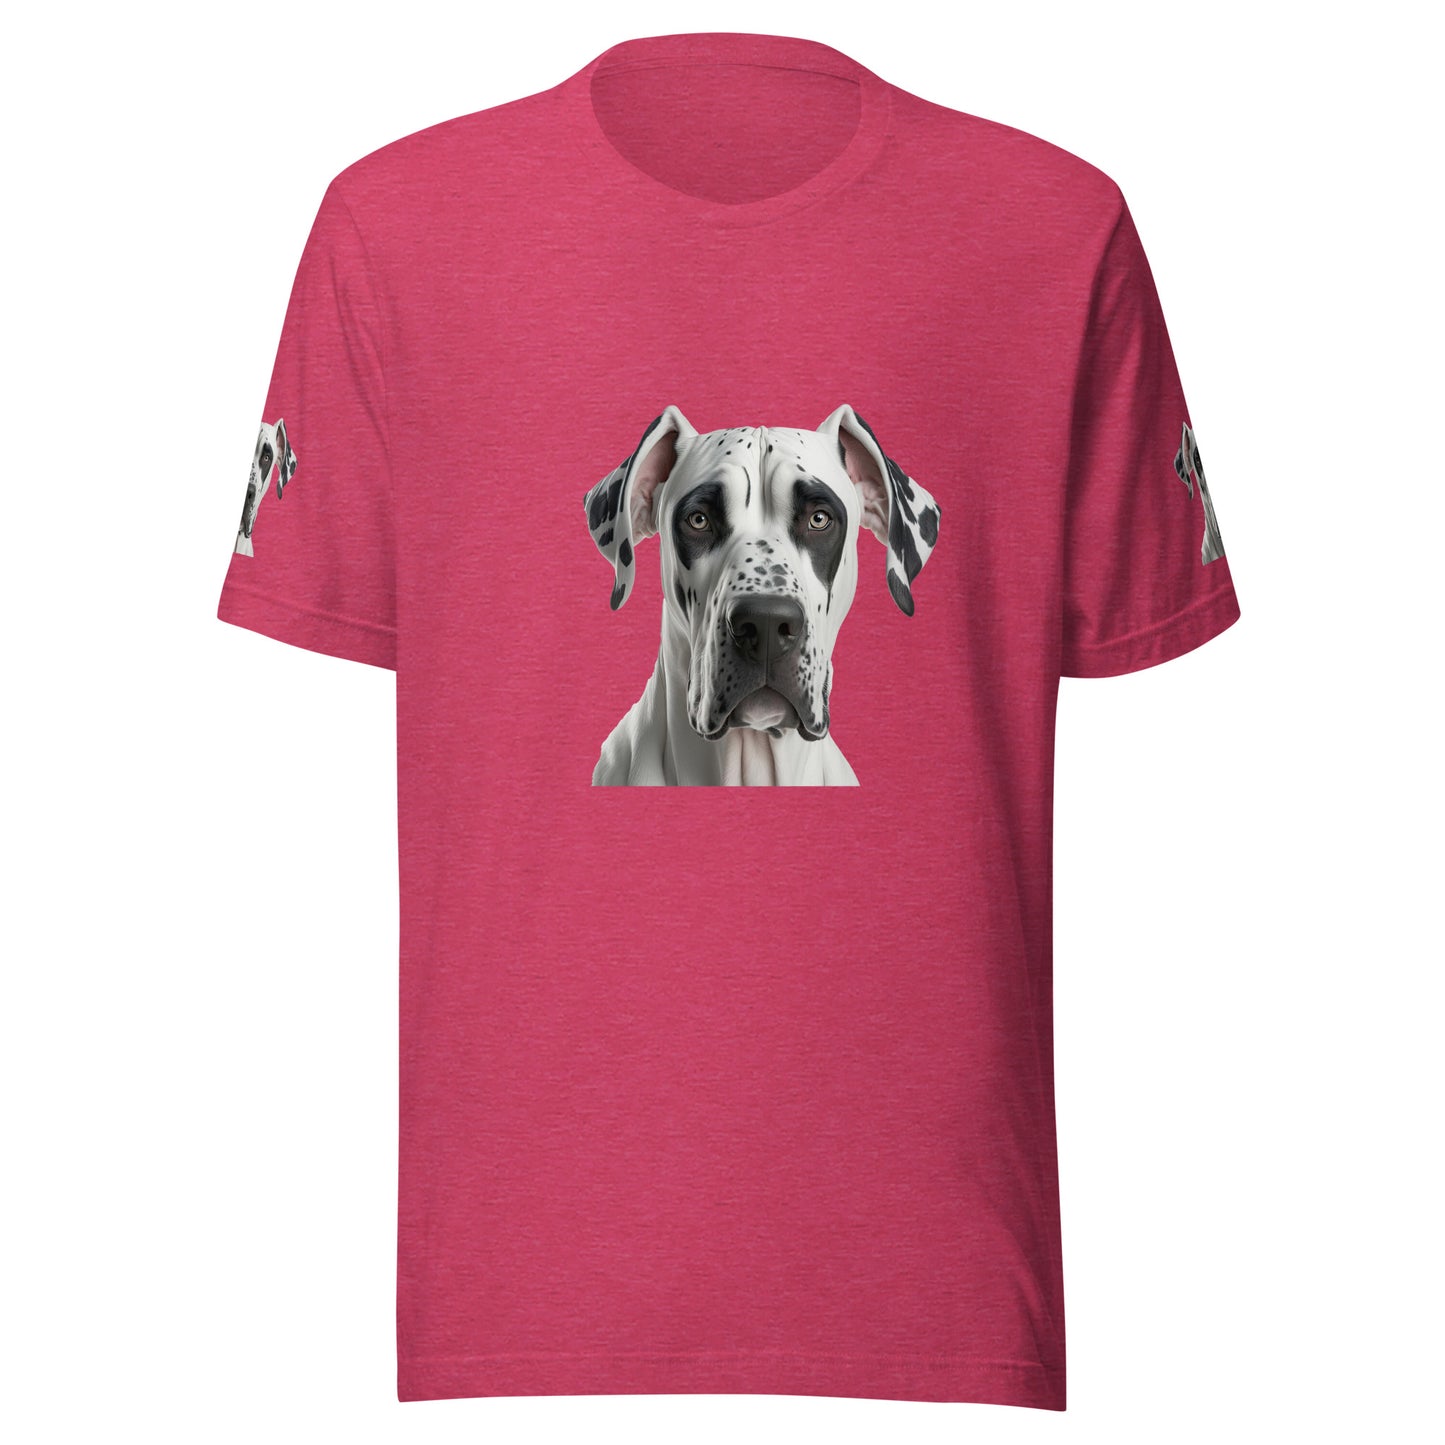 Women and Men's (Unisex) T-Shirt printed with a portrait of a Great Dane